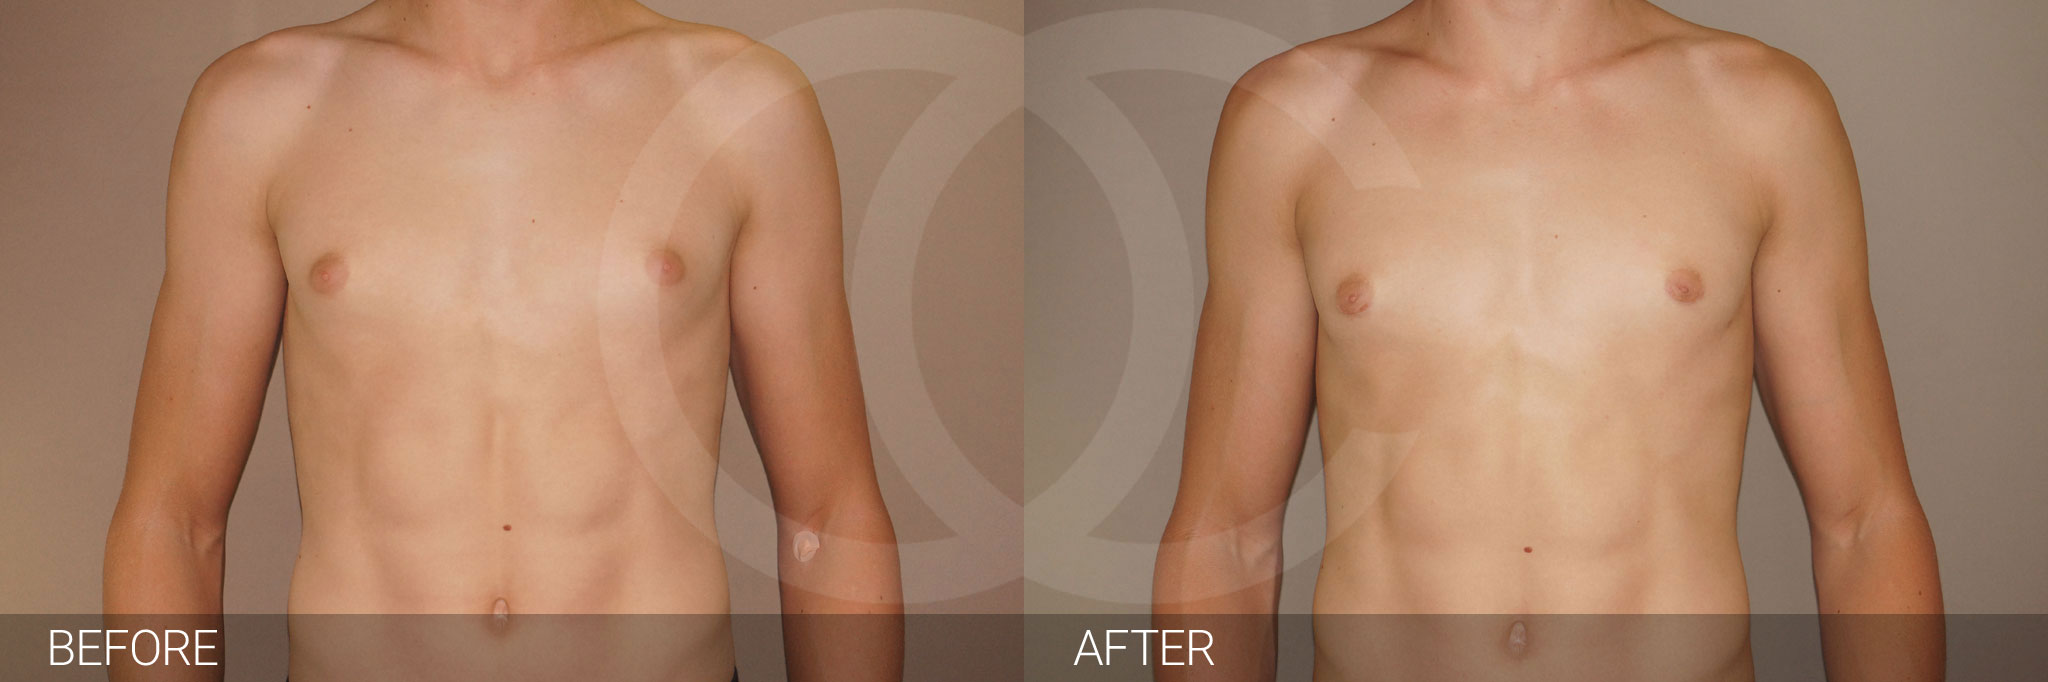 Gynecomastia with partial gland removal ante/post-op I